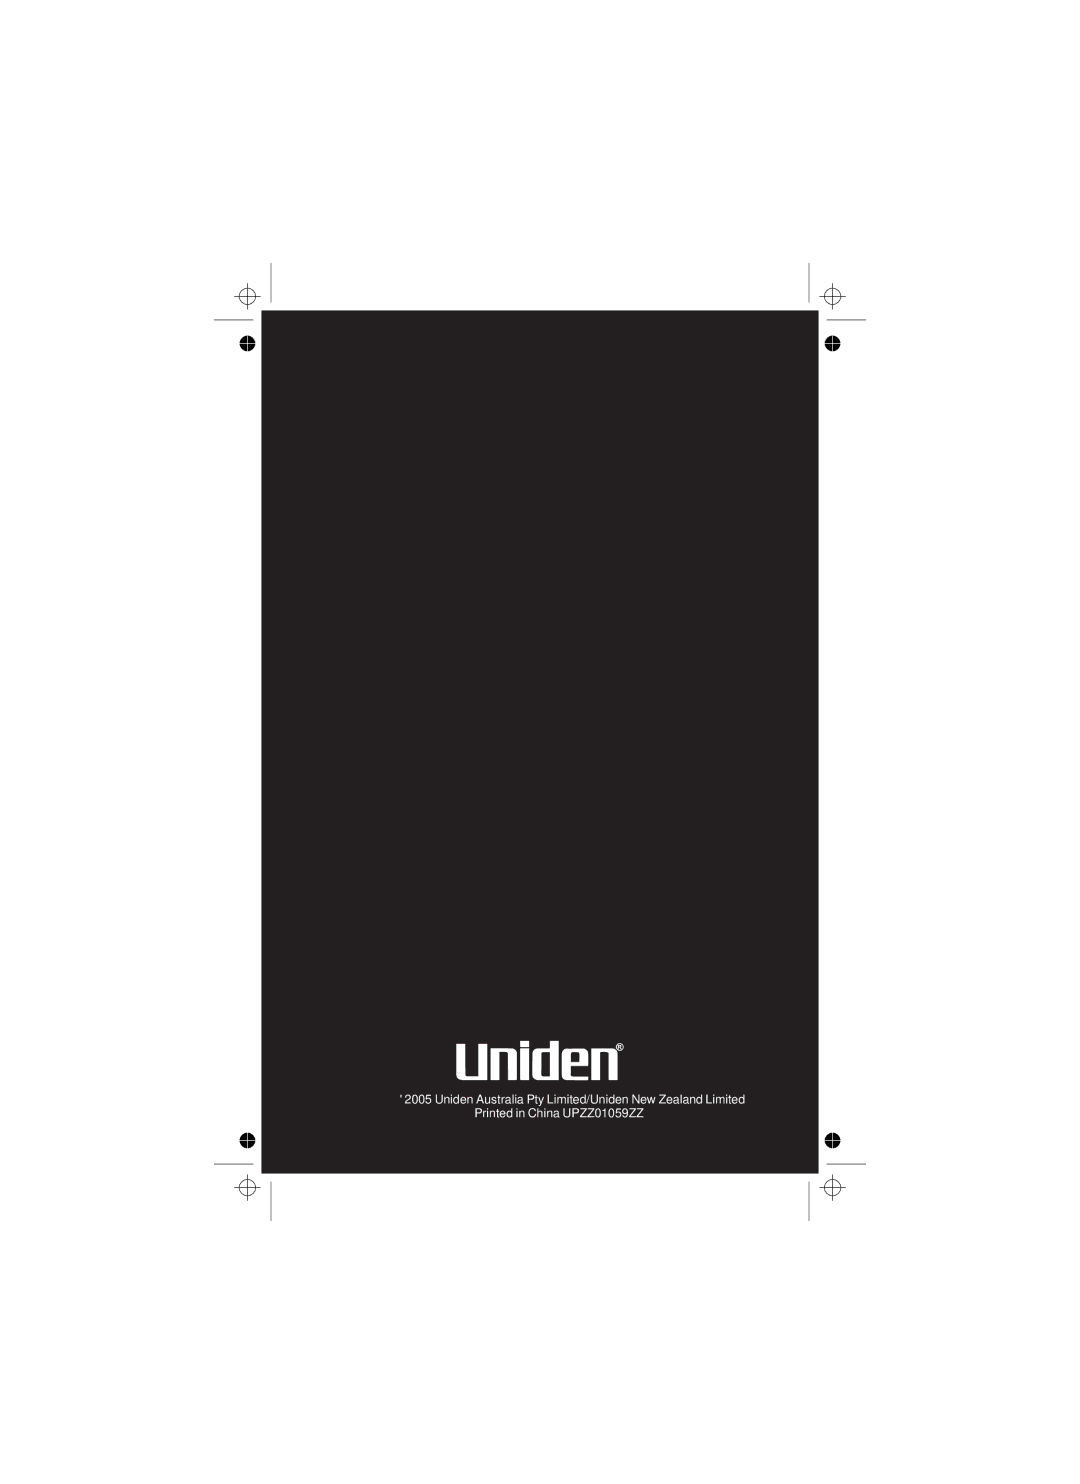 Uniden XS1210 owner manual Uniden Australia Pty Limited/Uniden New Zealand Limited 